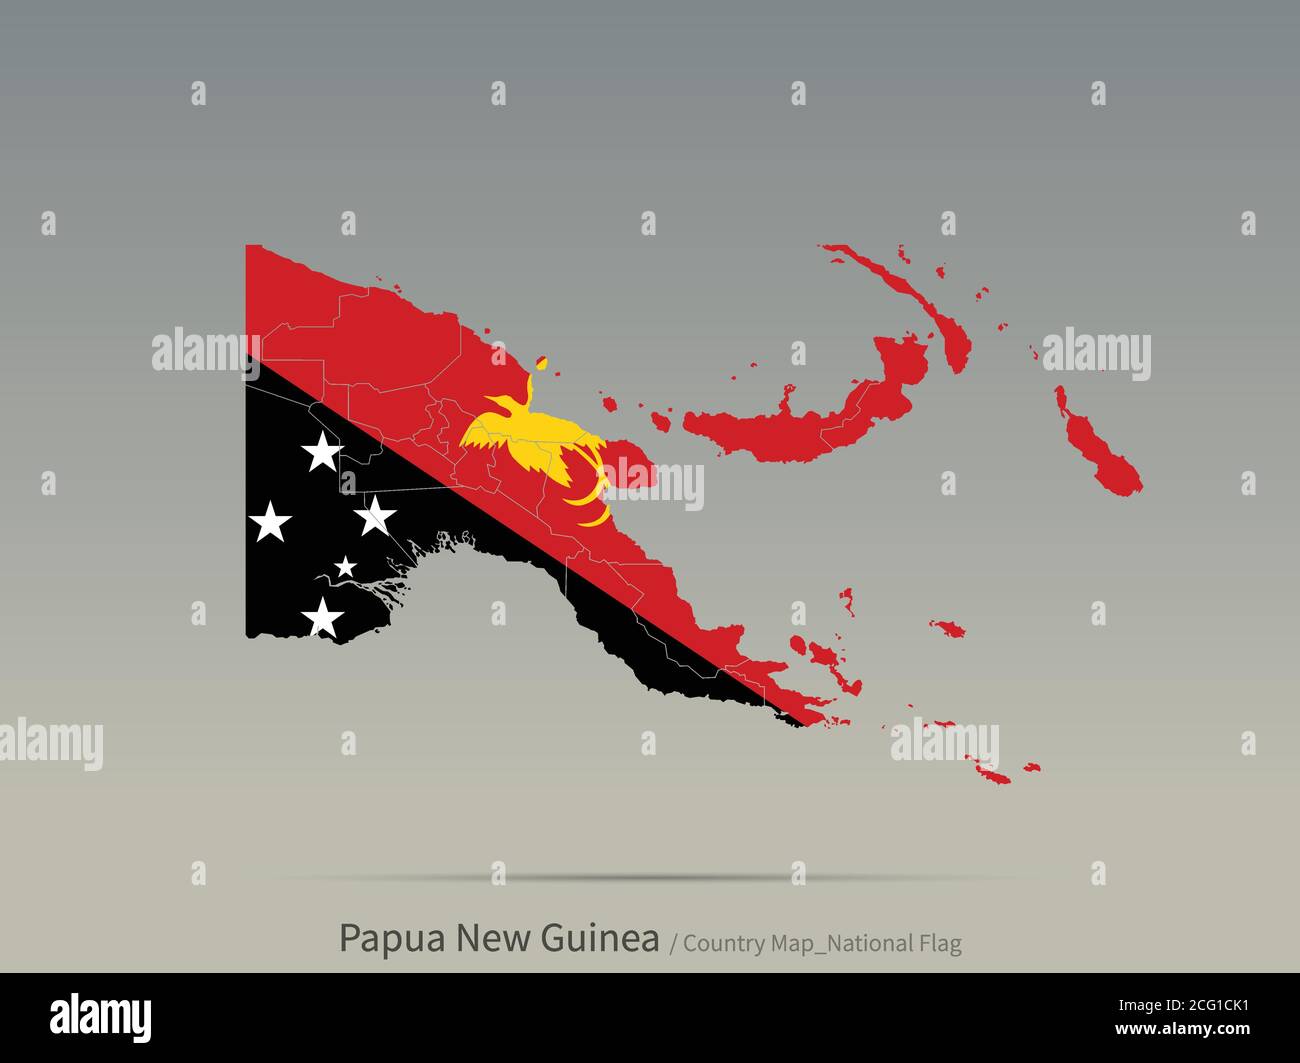 Papua new guinea Flag Isolated on Map. South Pacific countries map and flag. Stock Vector